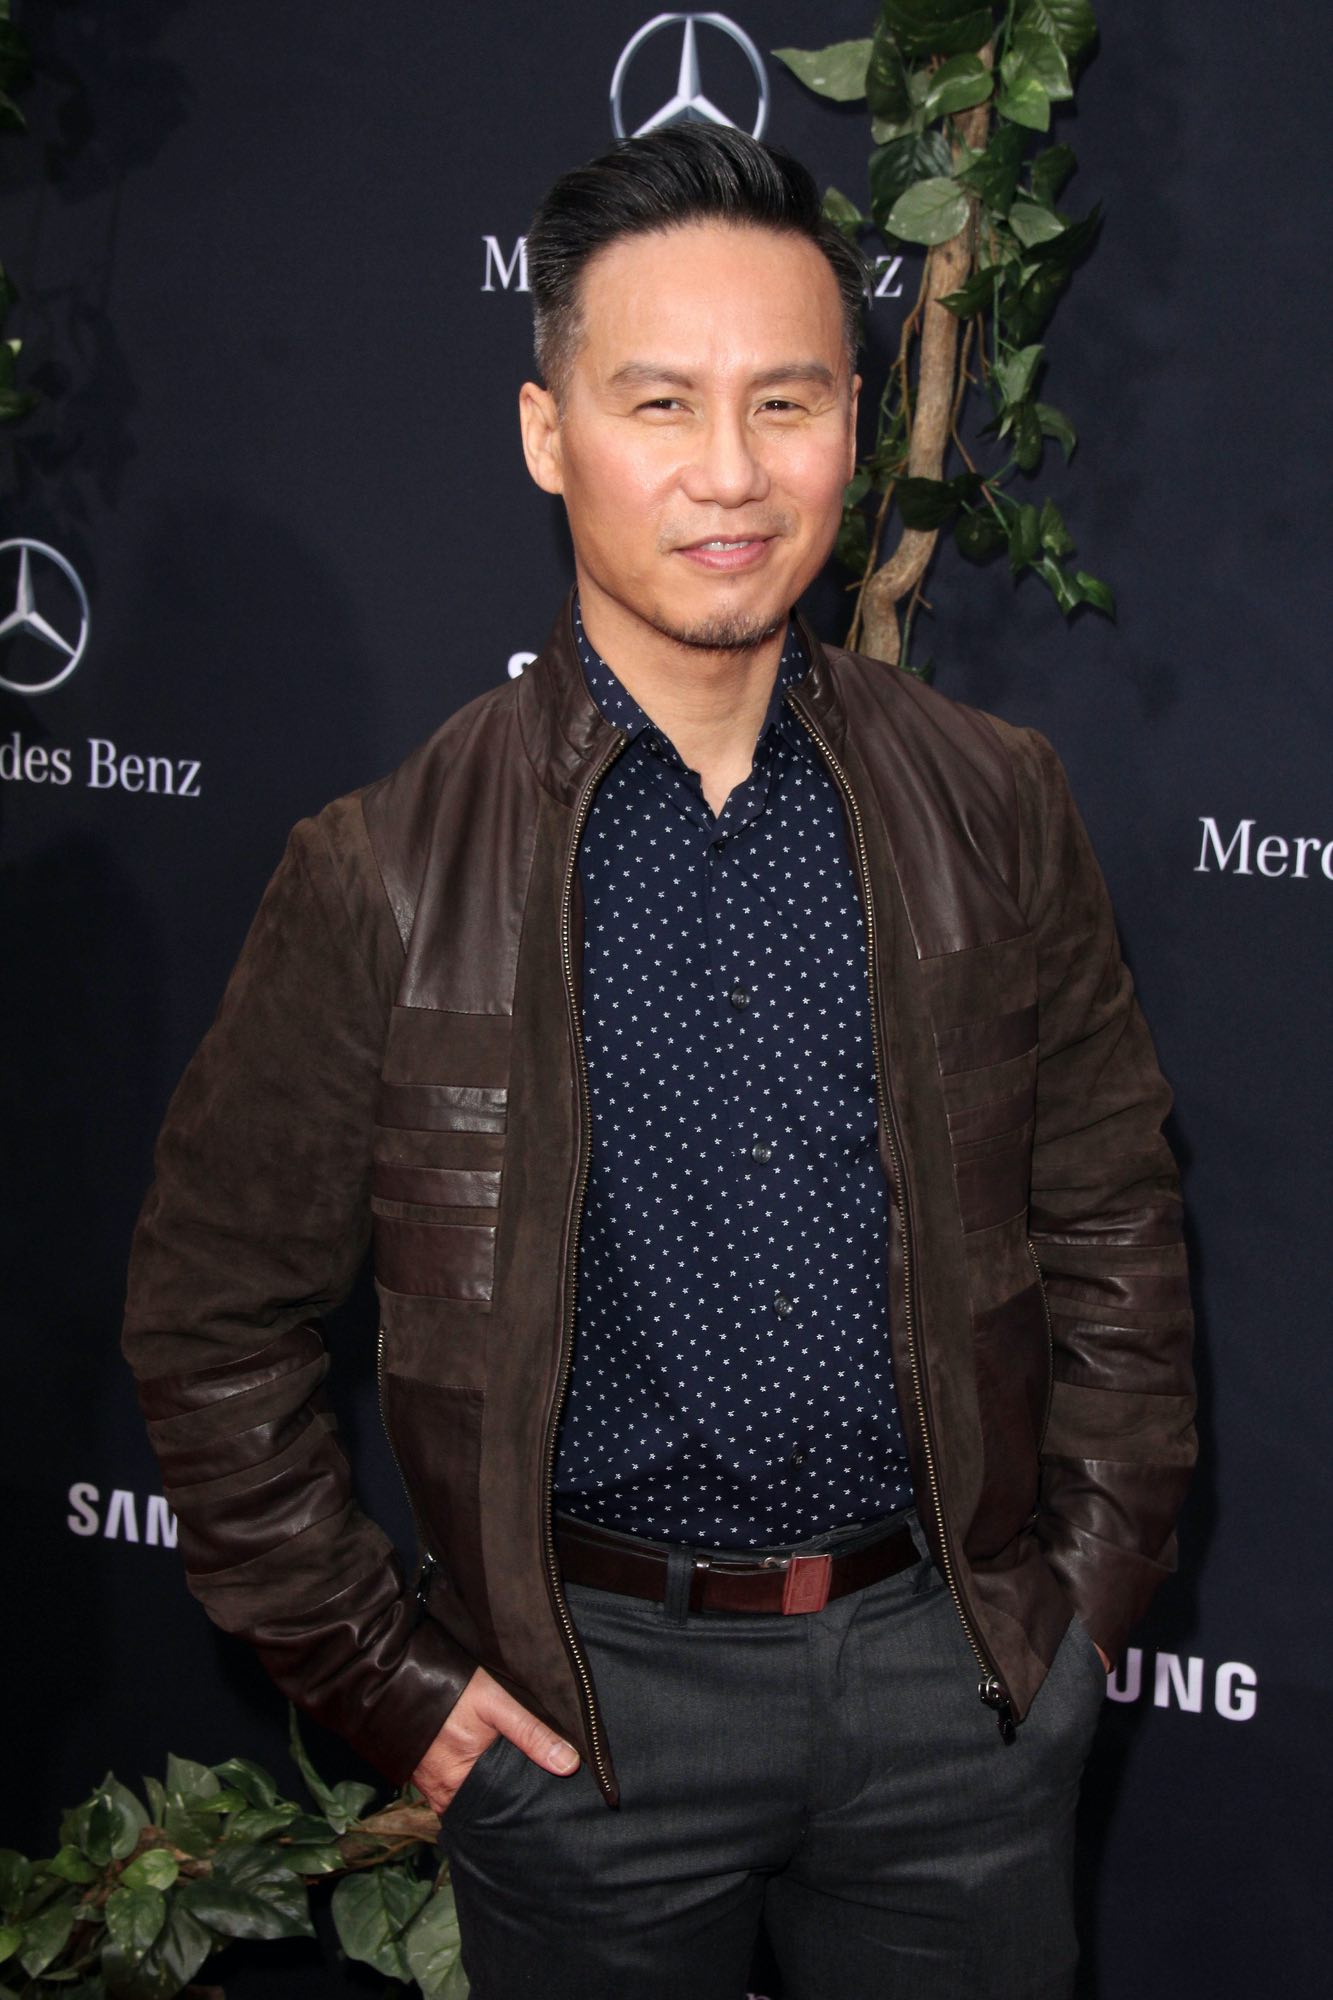 BD Wongs Height, Relationships, Style and Net Worth